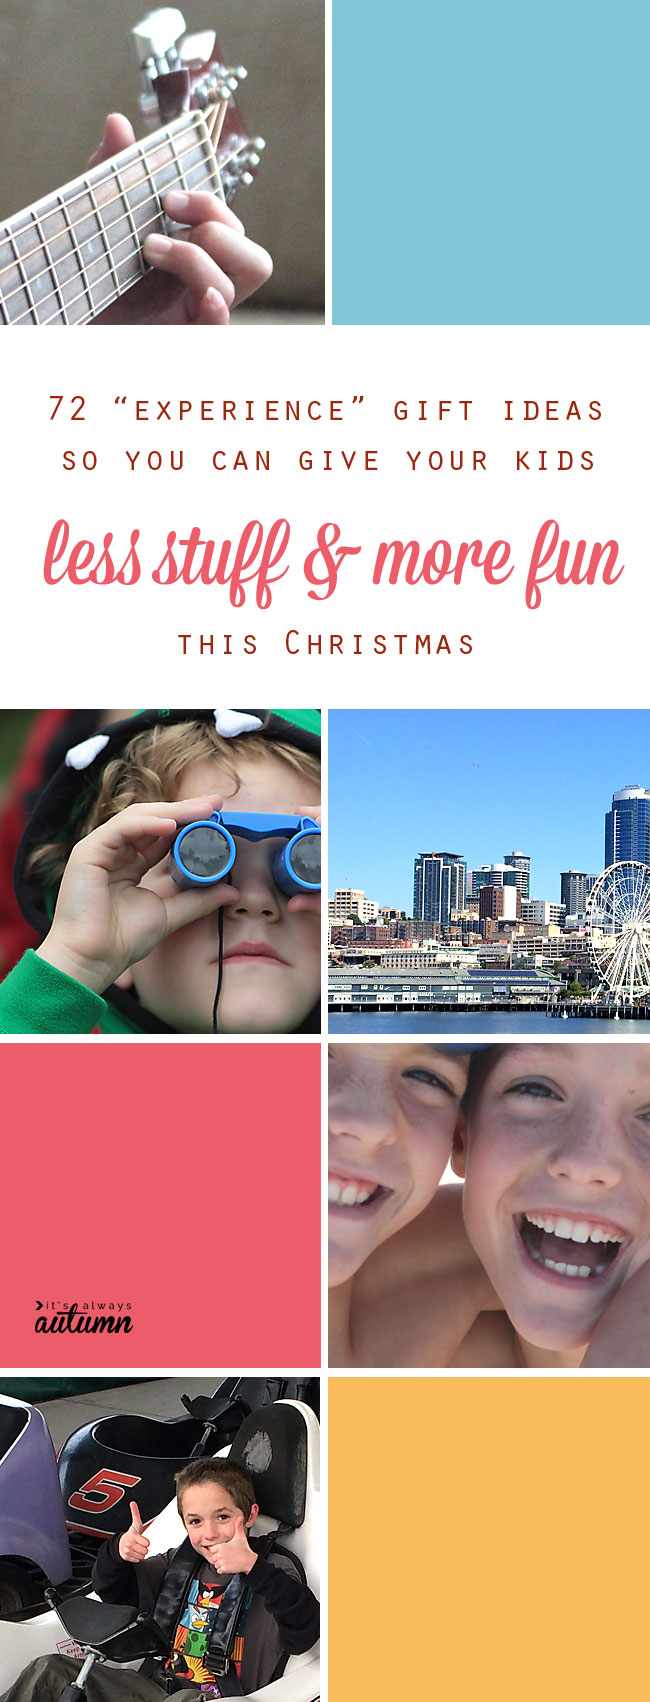 great Christmas gift ideas! give kids experiences instead of stuff - I love these ideas